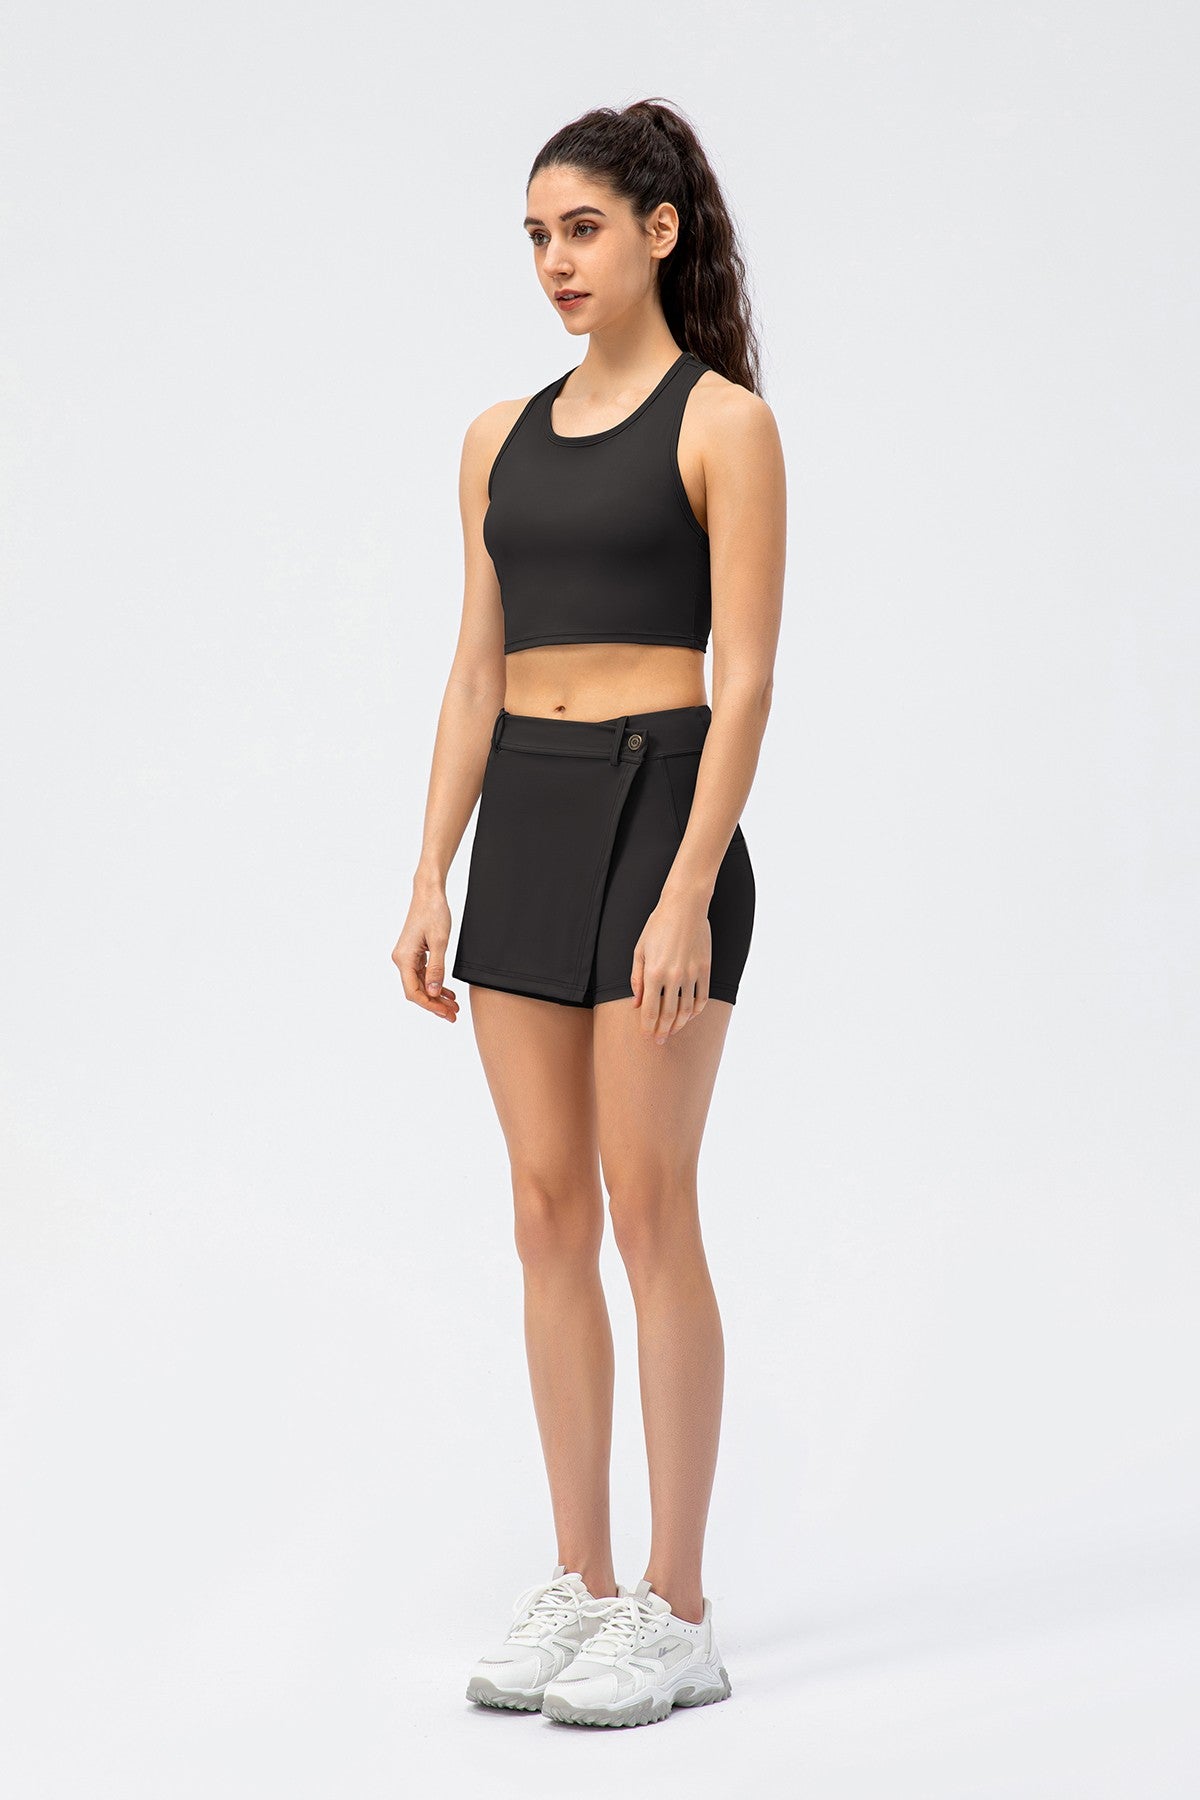 Women's Mid-Waist Split Front Skorts | 2-IN-1 Skirt and Shorts Combo –  Zioccie